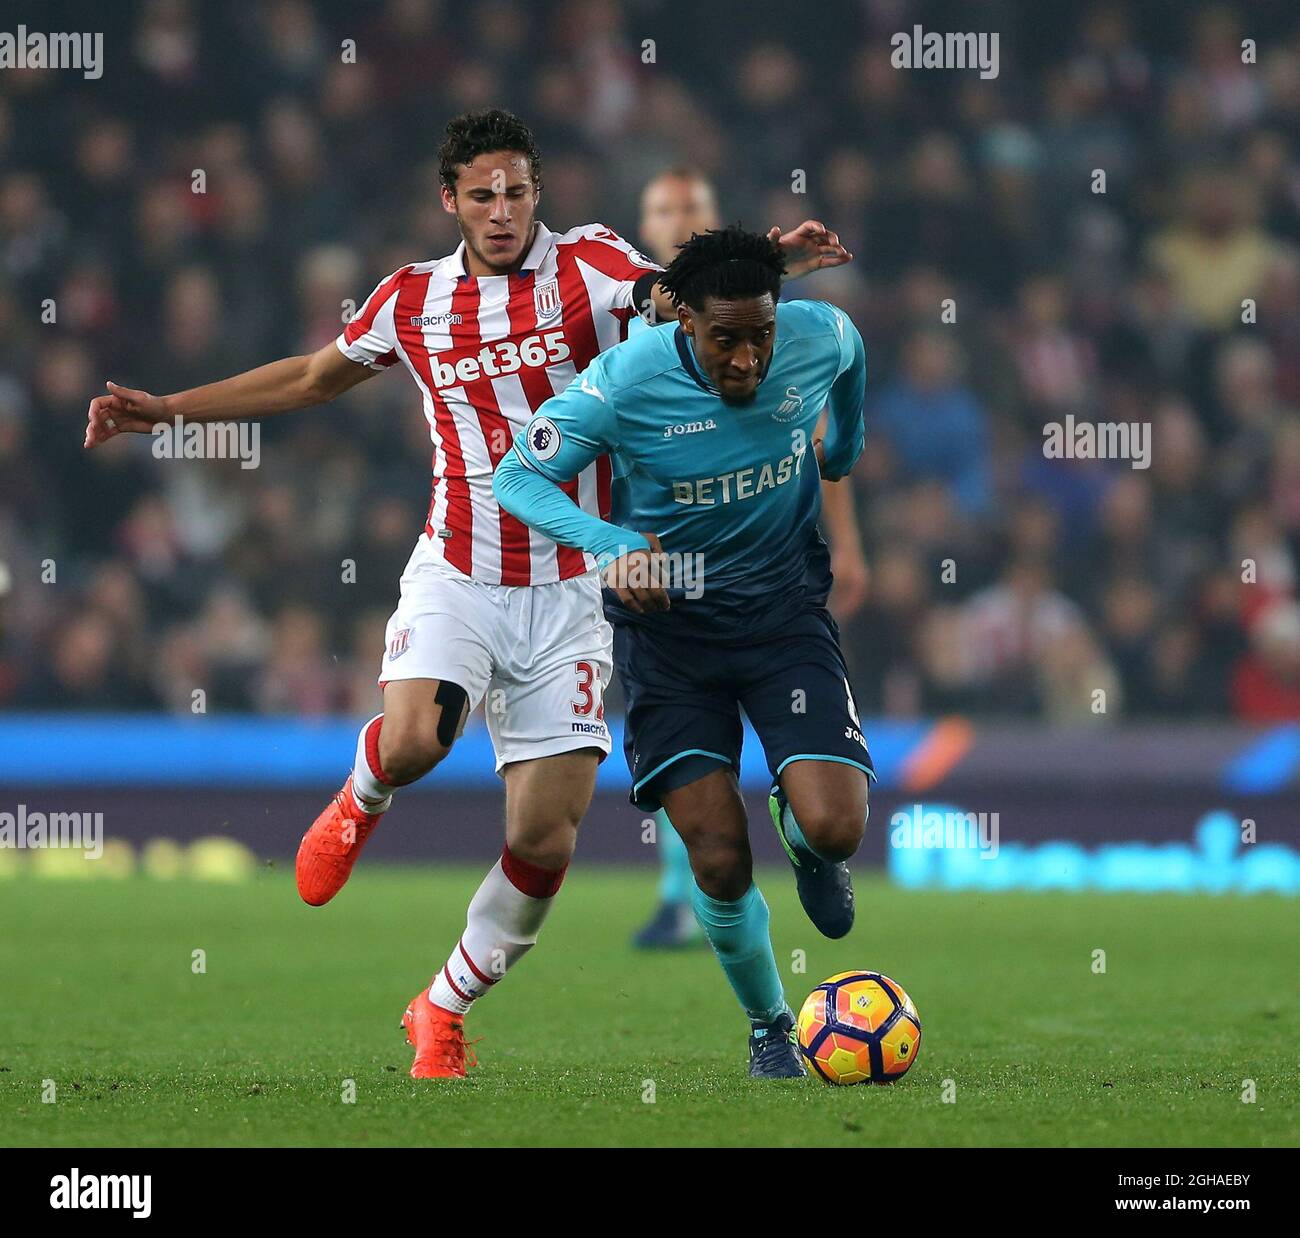 Ramadan Sobhi of Stoke City chases down Leroy Fer of Swansea City during the Premier League match at the Britannia Stadium, Stoke on Trent. Picture date: October 31st, 2016. Pic Simon Bellis/Sportimage via PA Images Stock Photo